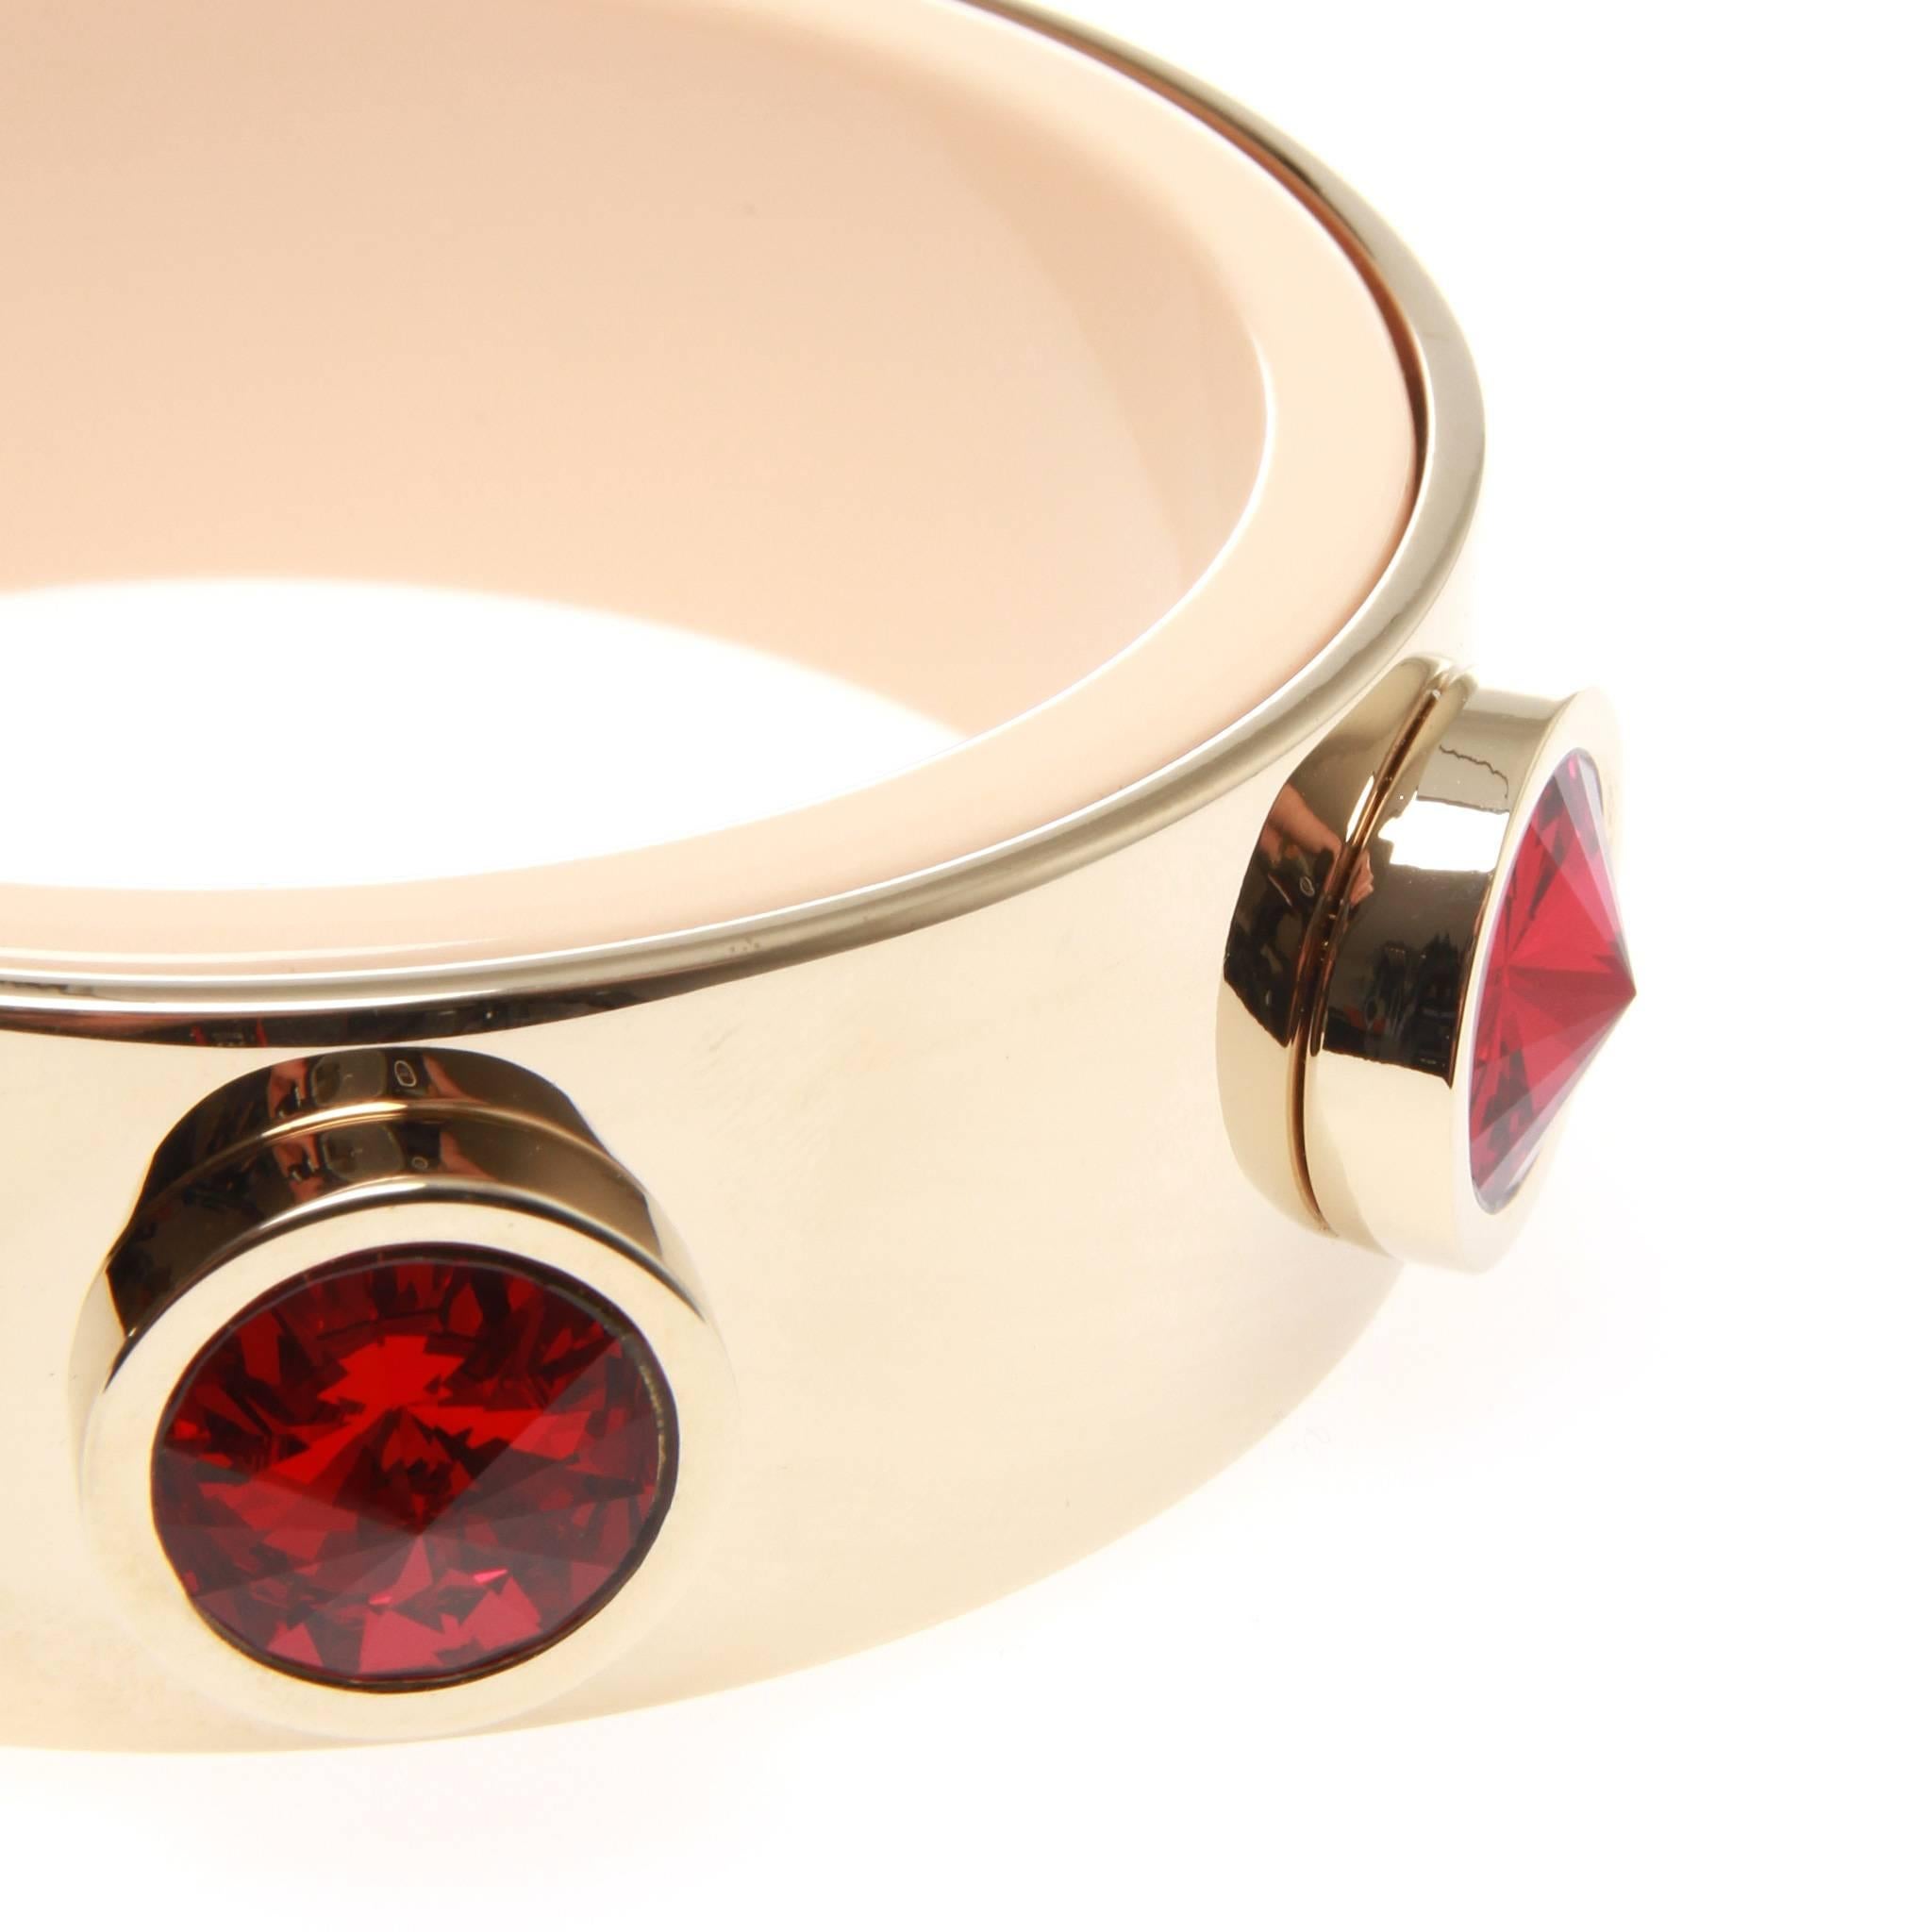 Gold brass red central stone bracelet from Givenchy featuring gold tone metal and multi-faceted stone embellishments.

Composition: 100% Brass

Details: two-tone pattern, Red Rhinestones